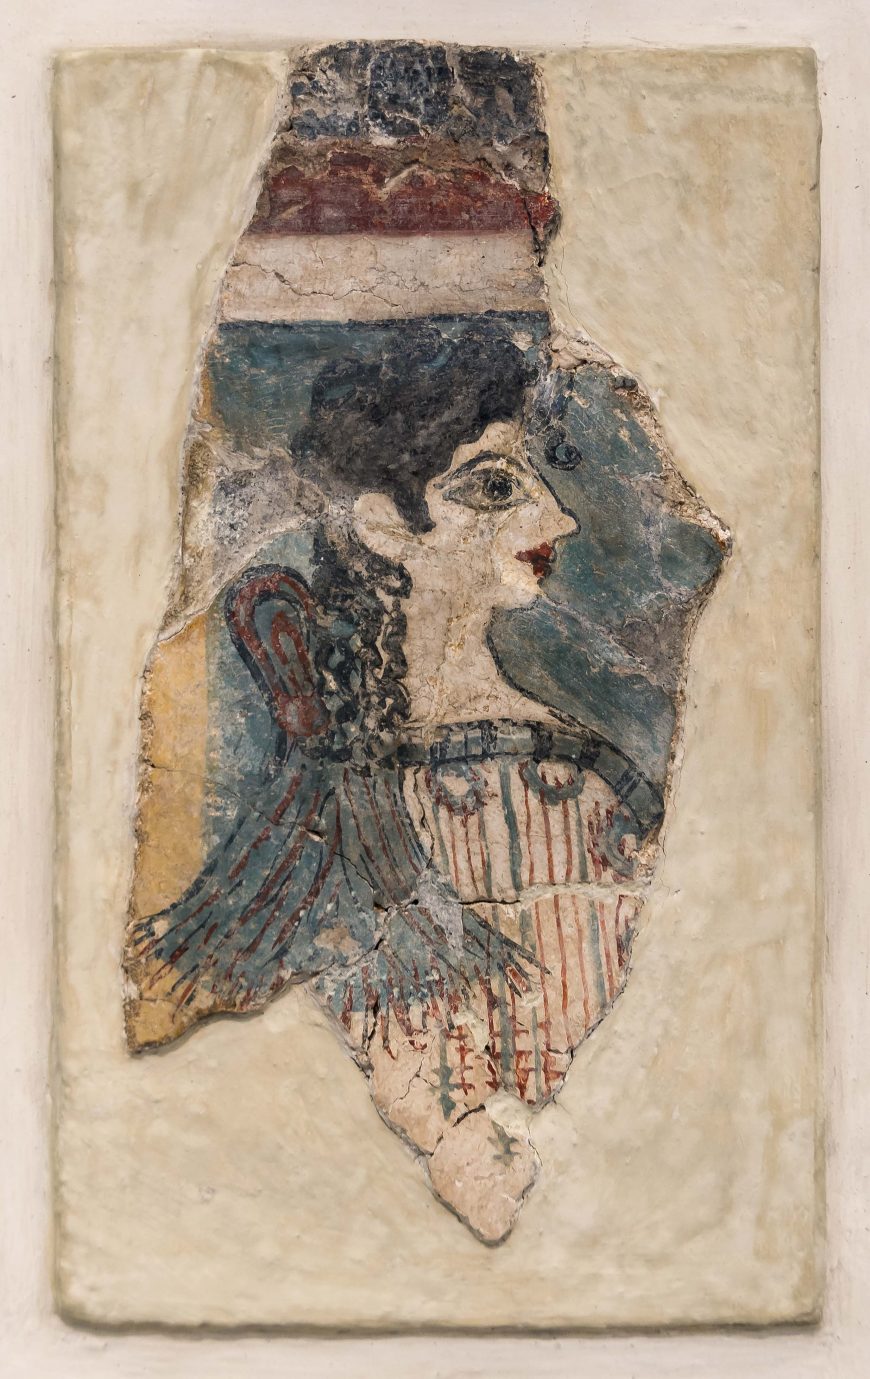 Woman or priestess ("La Parisienne") from the Camp-Stool fresco, western wing of the palace at Knossos, buon fresco, 20 cm high (Archaeological Museum of Heraklion)